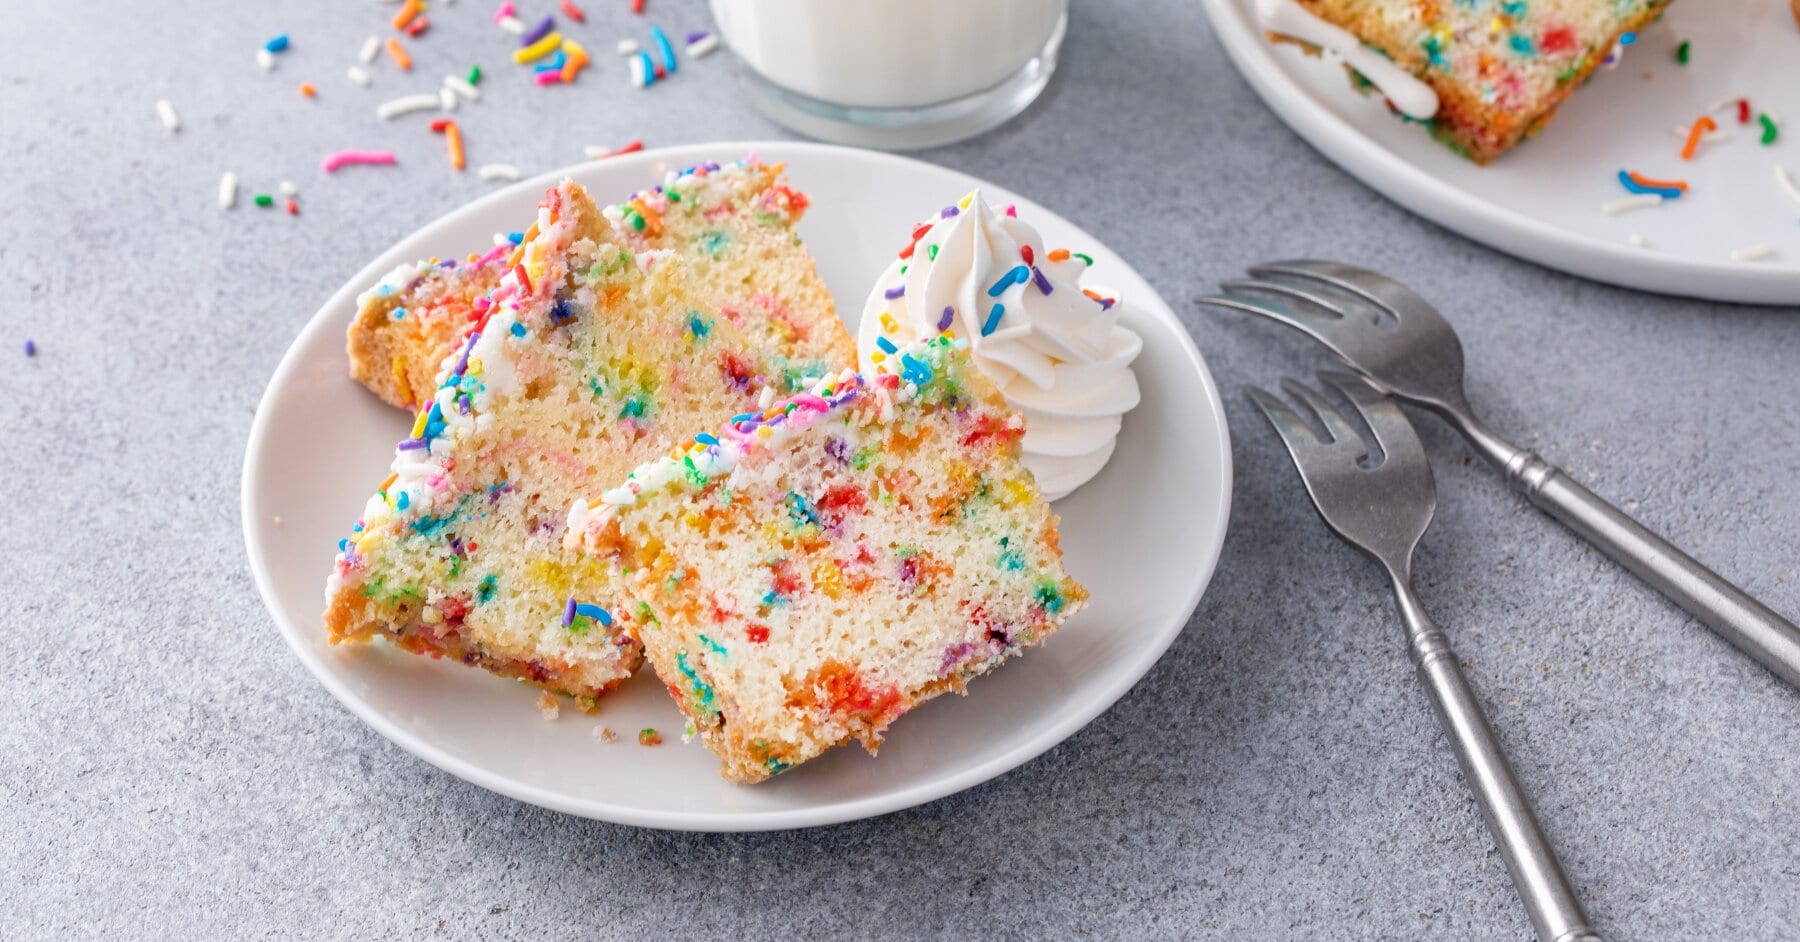 Homemade Funfetti Bread with Whipped Cream